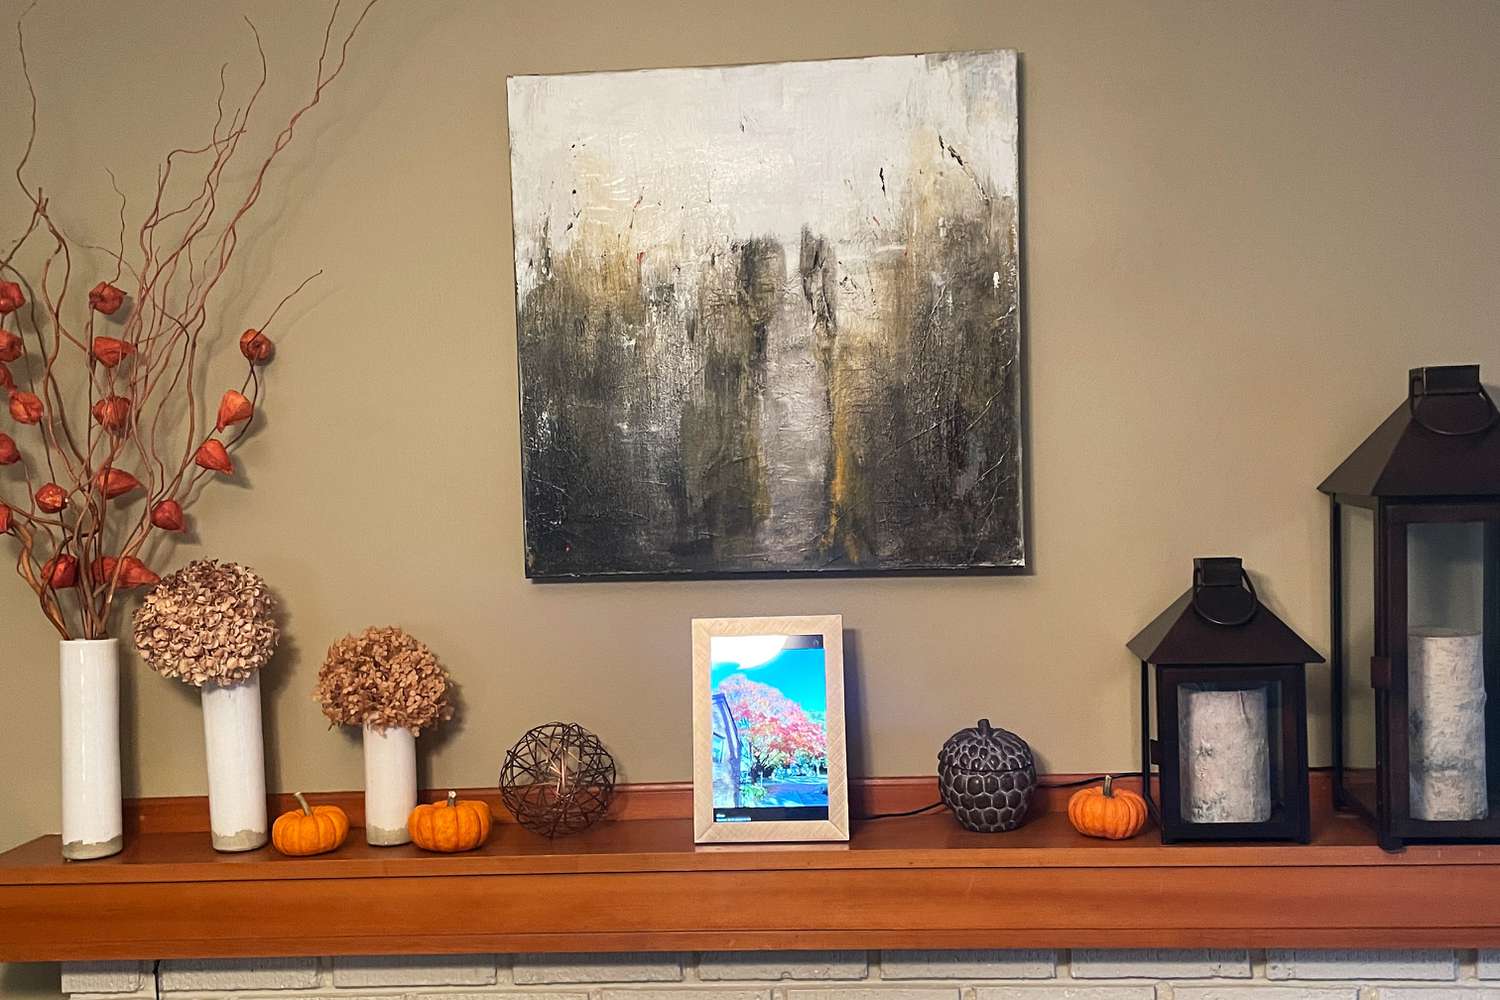 Polaroid Digital Photo Frame on a ledge displaying the outdoors on a decorated fireplace mantel